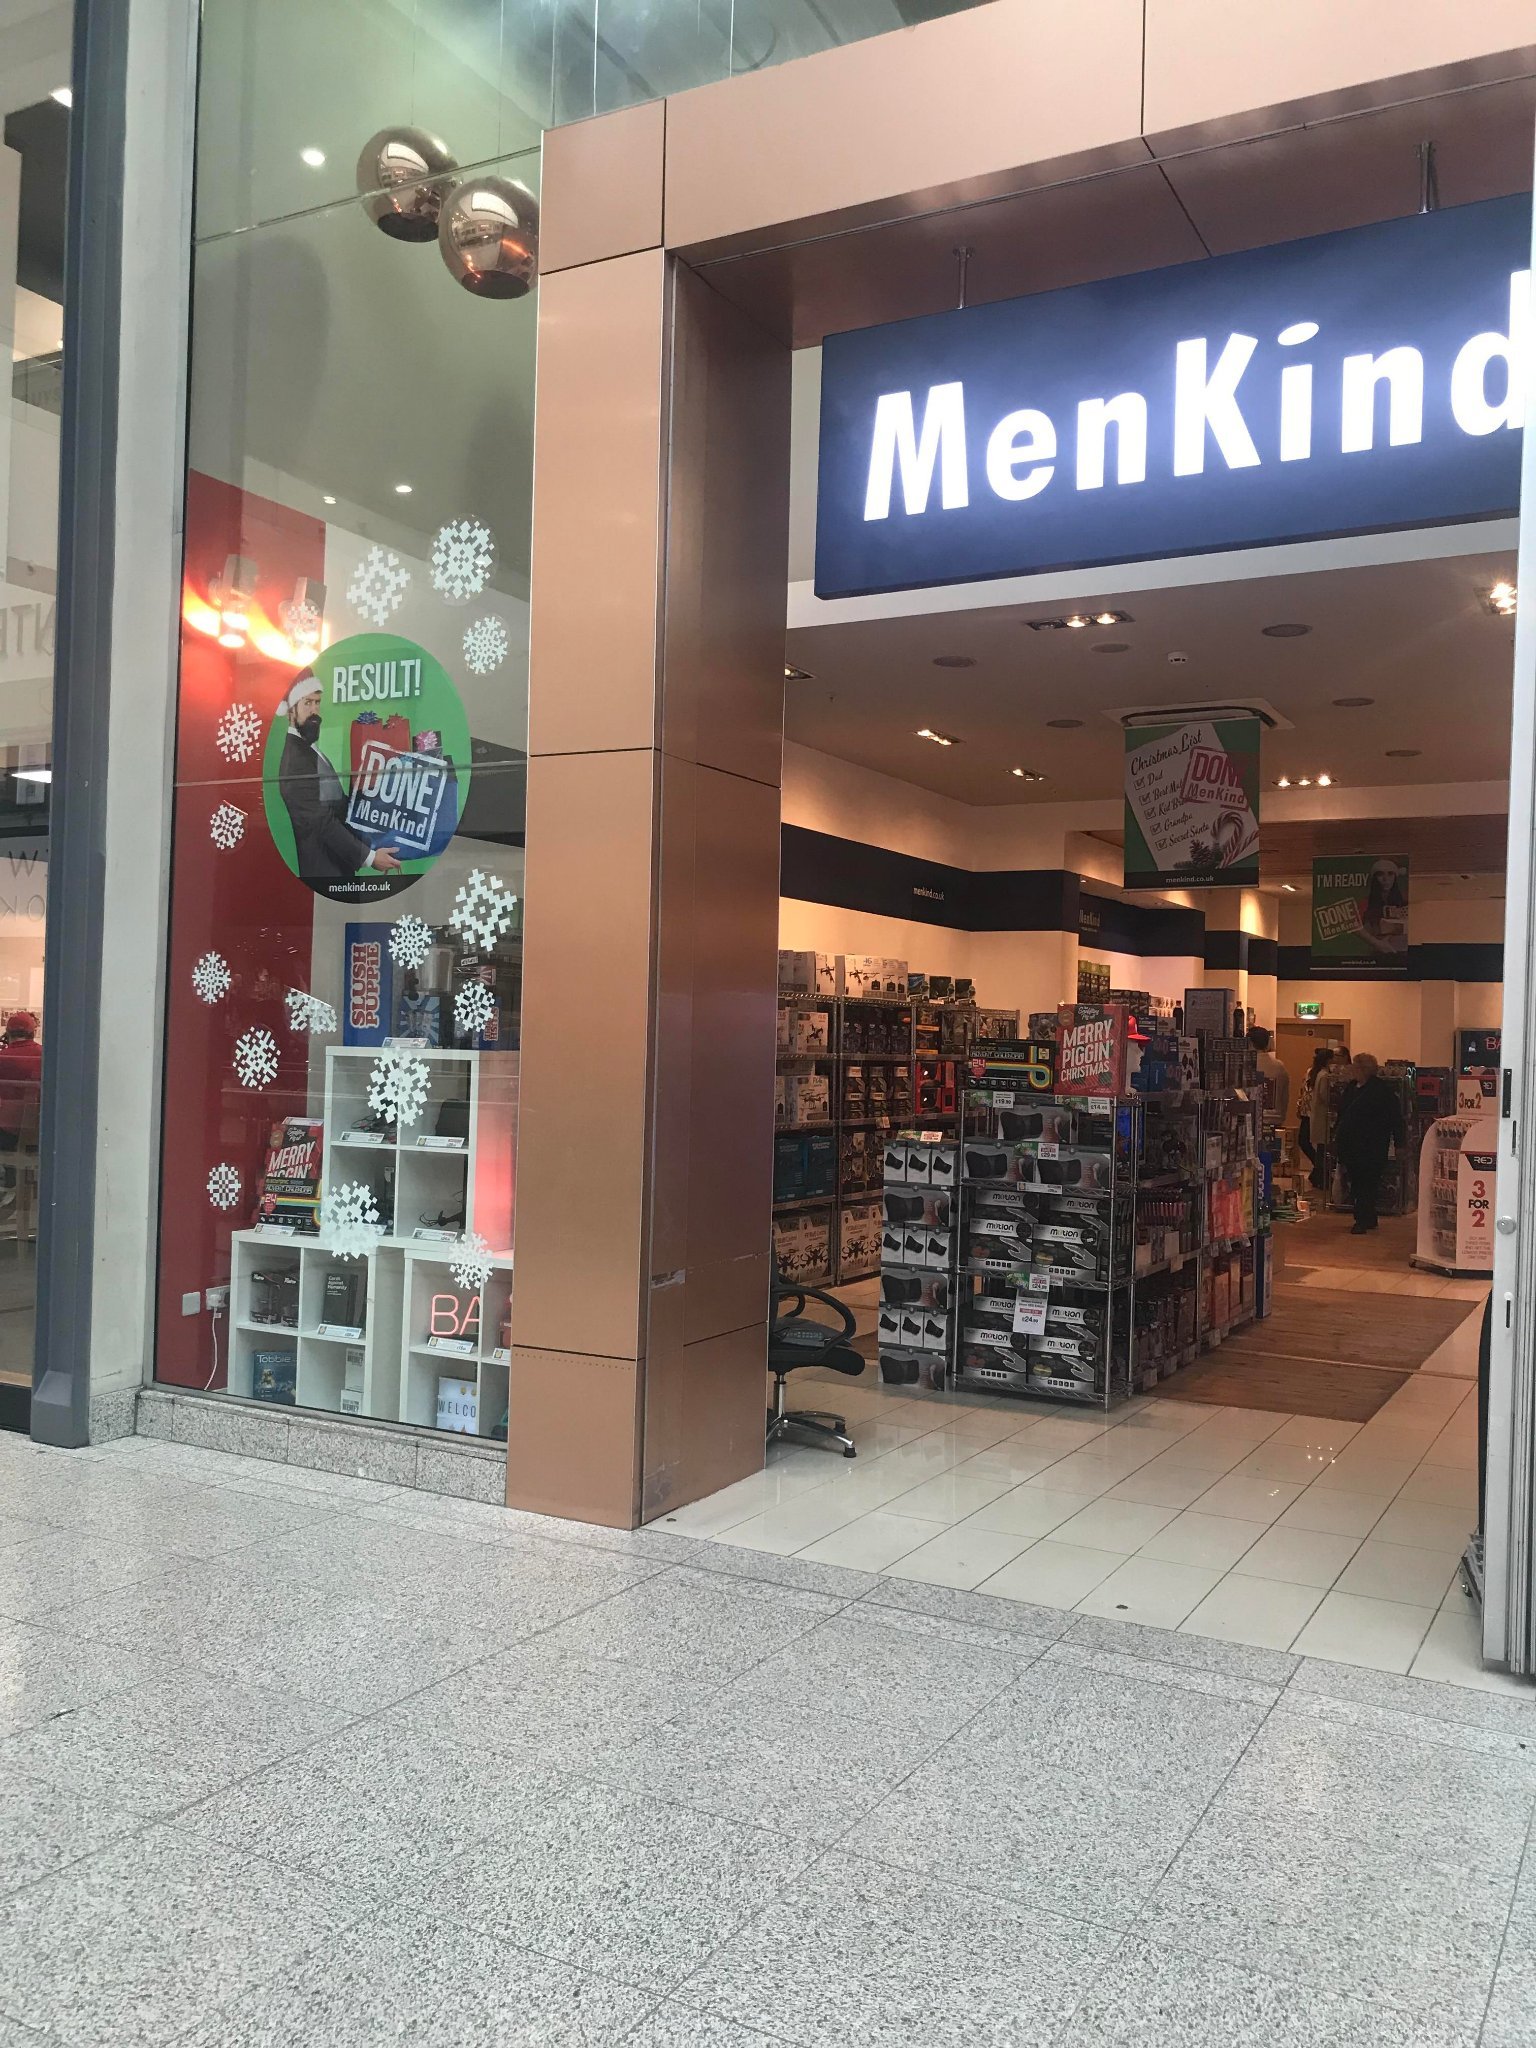 Welcome to Manchester Menkind Upper! 
We are located in the Arndale center, selling unique and original gifts for men.